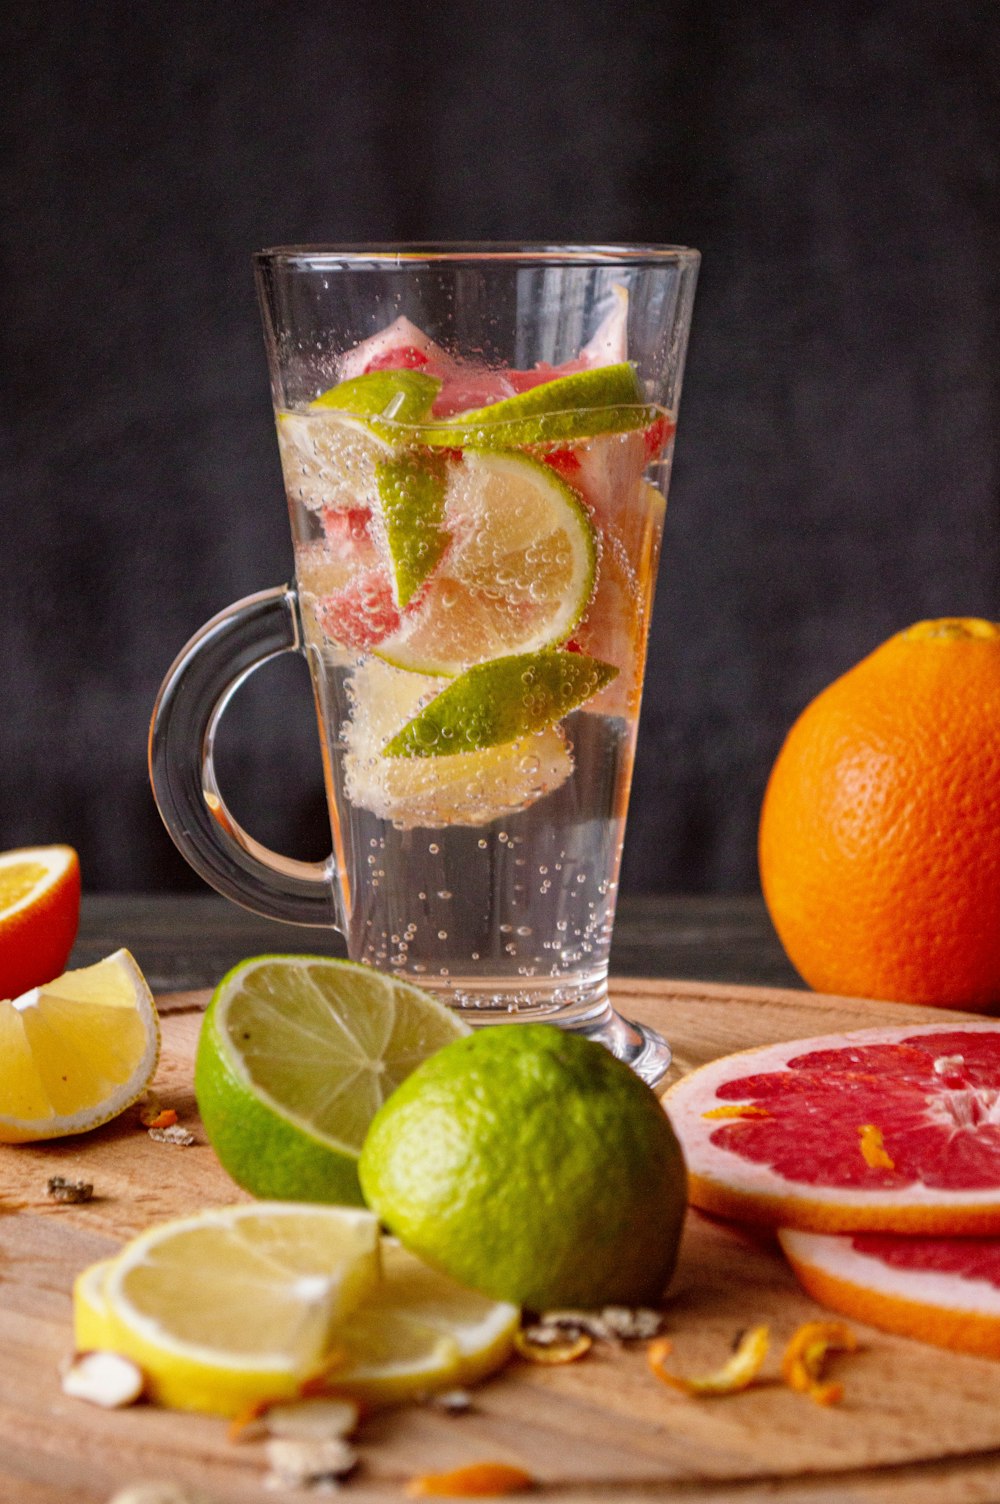 clear glass mug with sliced orange fruit and water